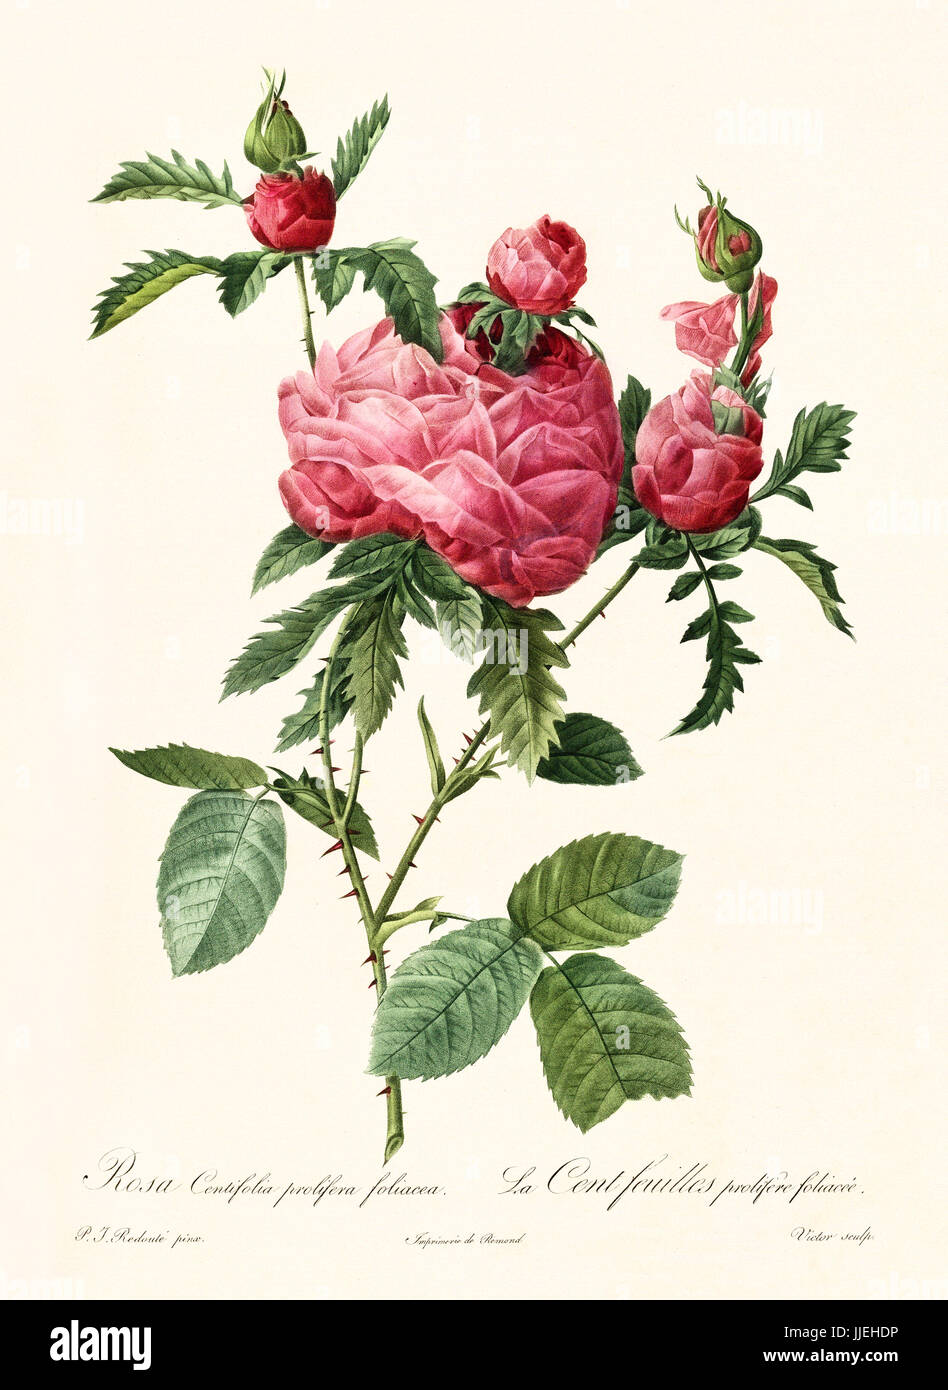 Old illustration of Rosa centifolia prolifera foliacea. Created by P. R. Redoute, published on Les Roses, Imp. Firmin Didot, Paris, 1817-24 Stock Photo